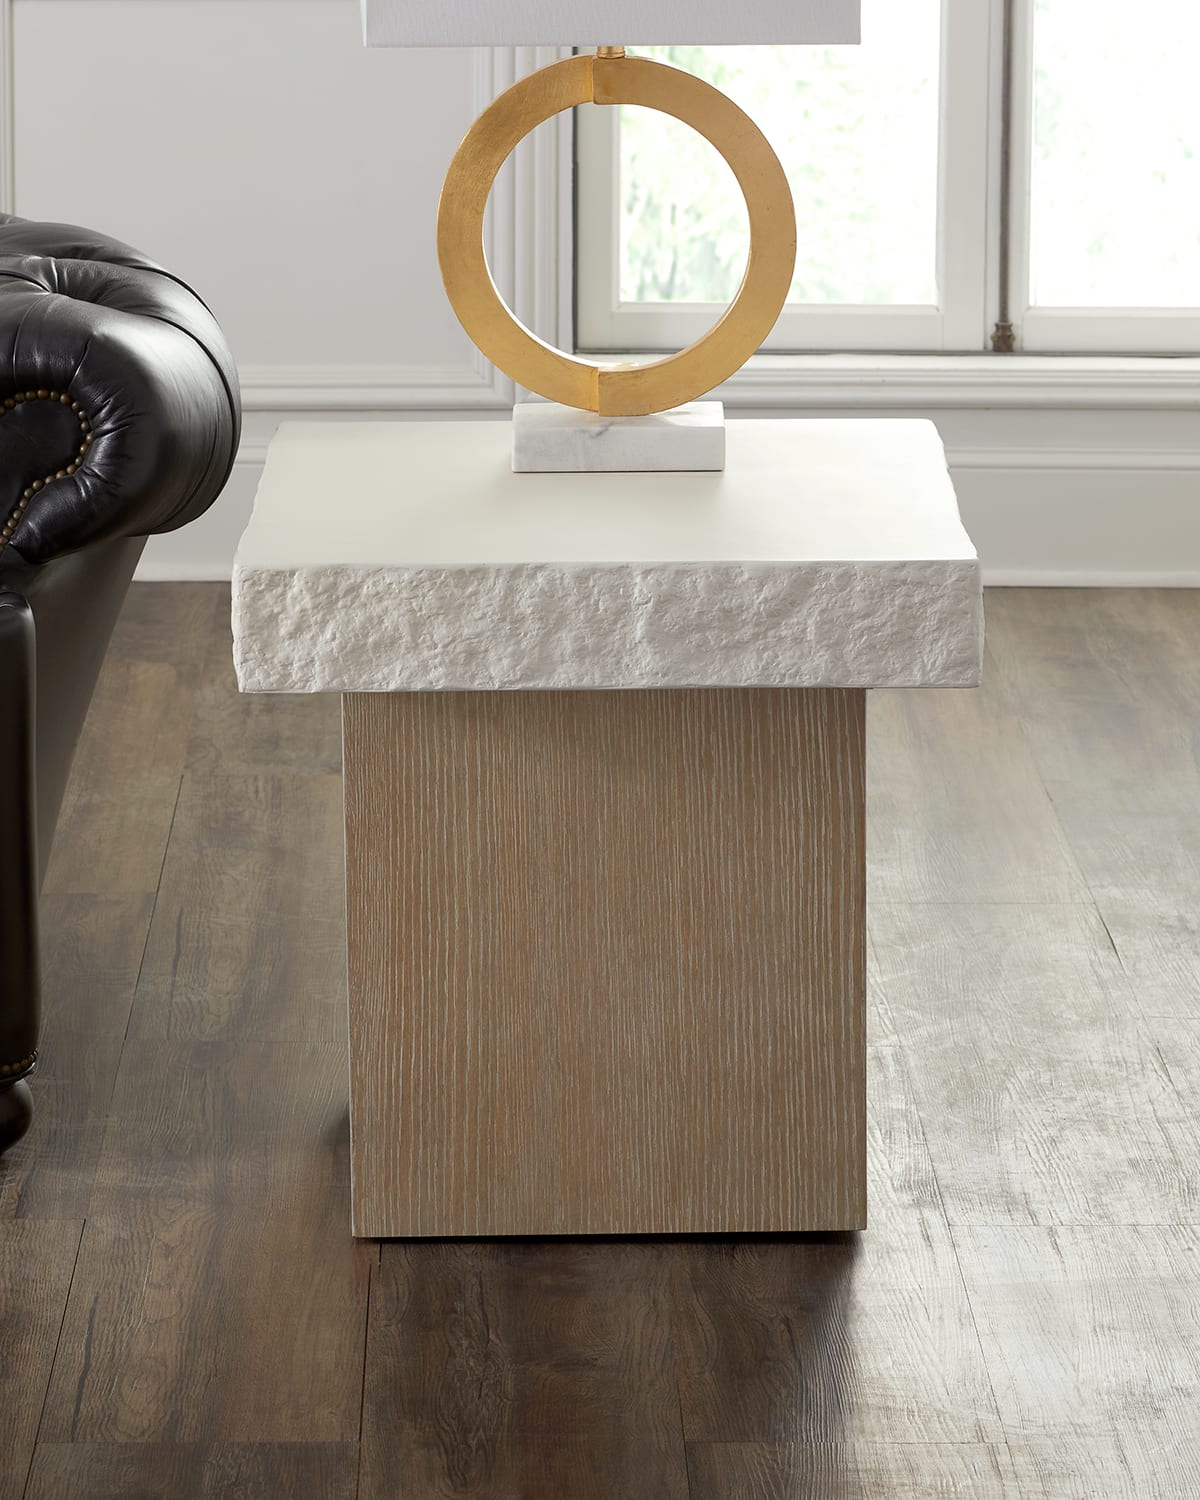 Beauclair Side Table